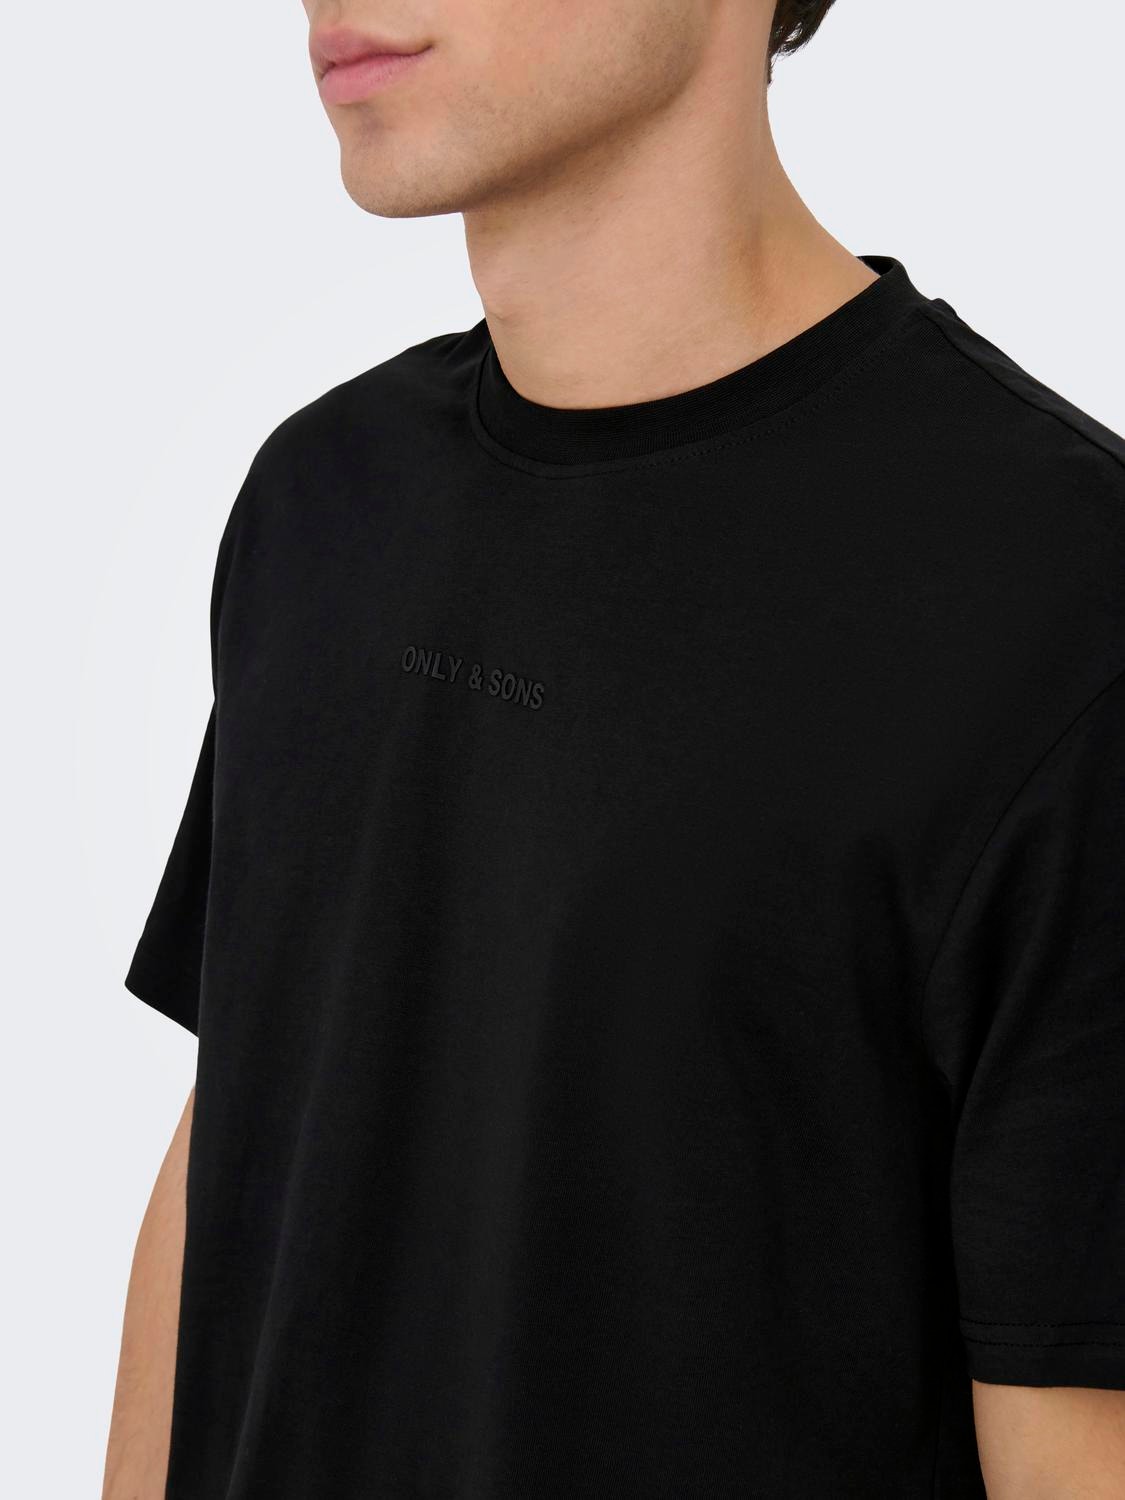 ONLY & SONS O-neck t-shirt  -Black - 22028147